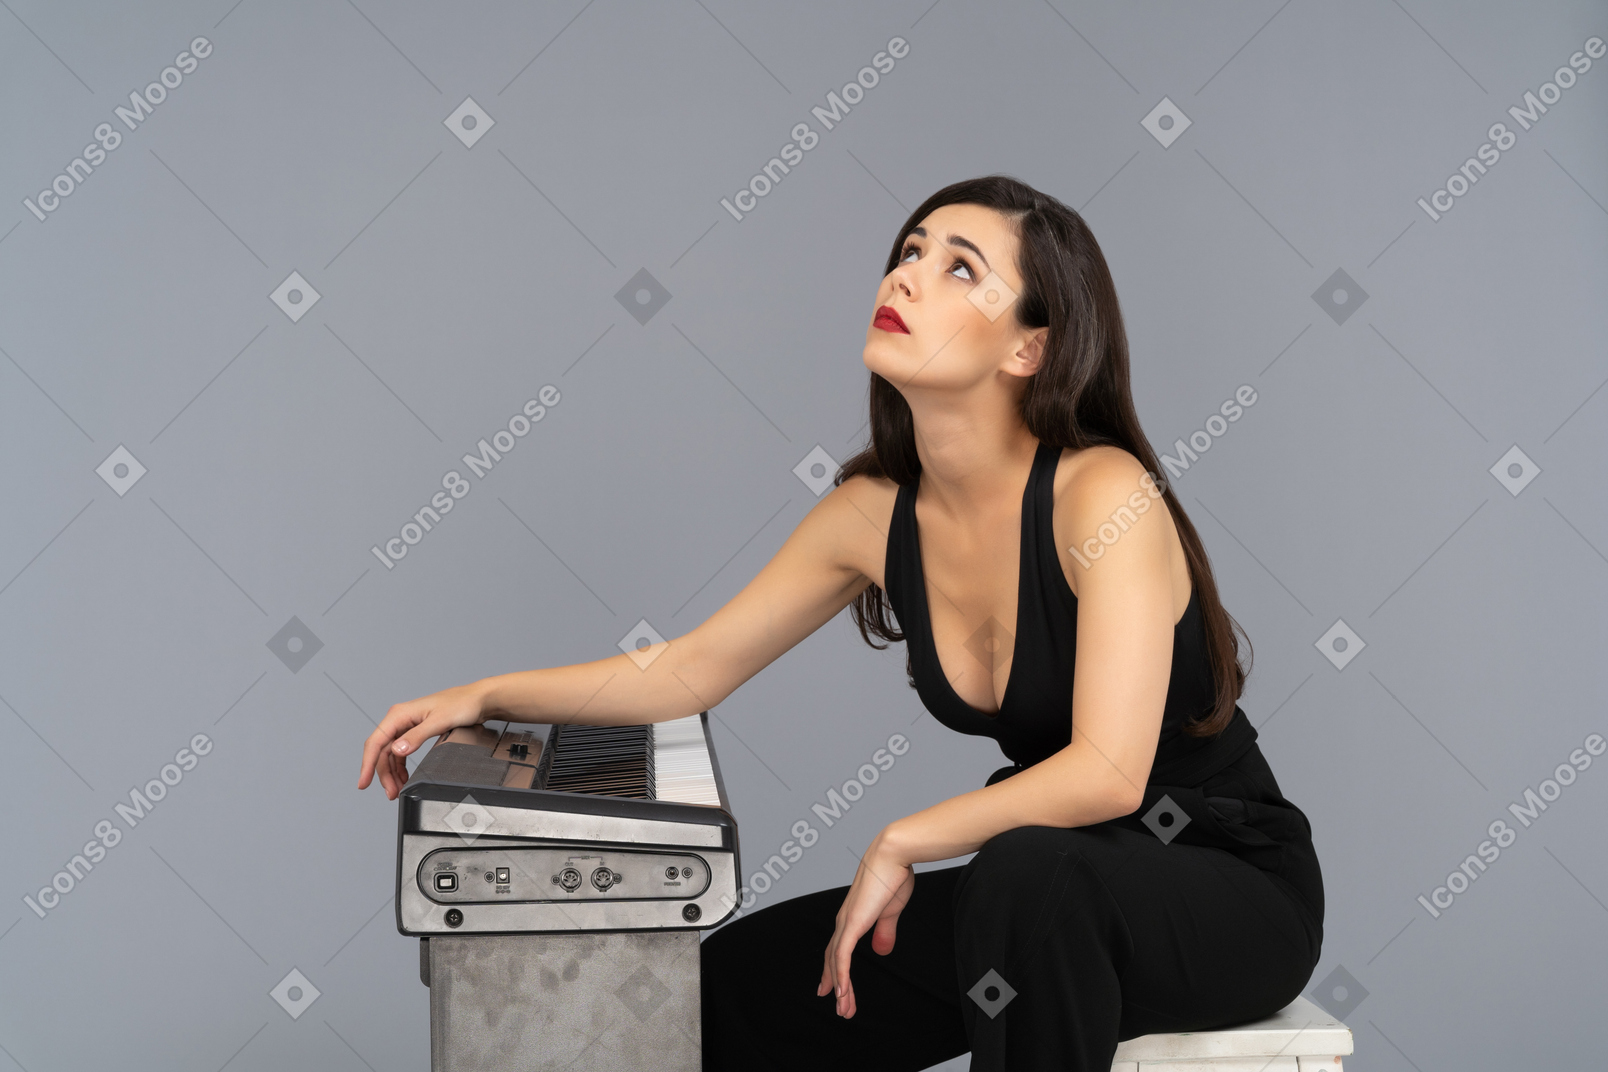 Serious young woman being lost in thought next to a piano